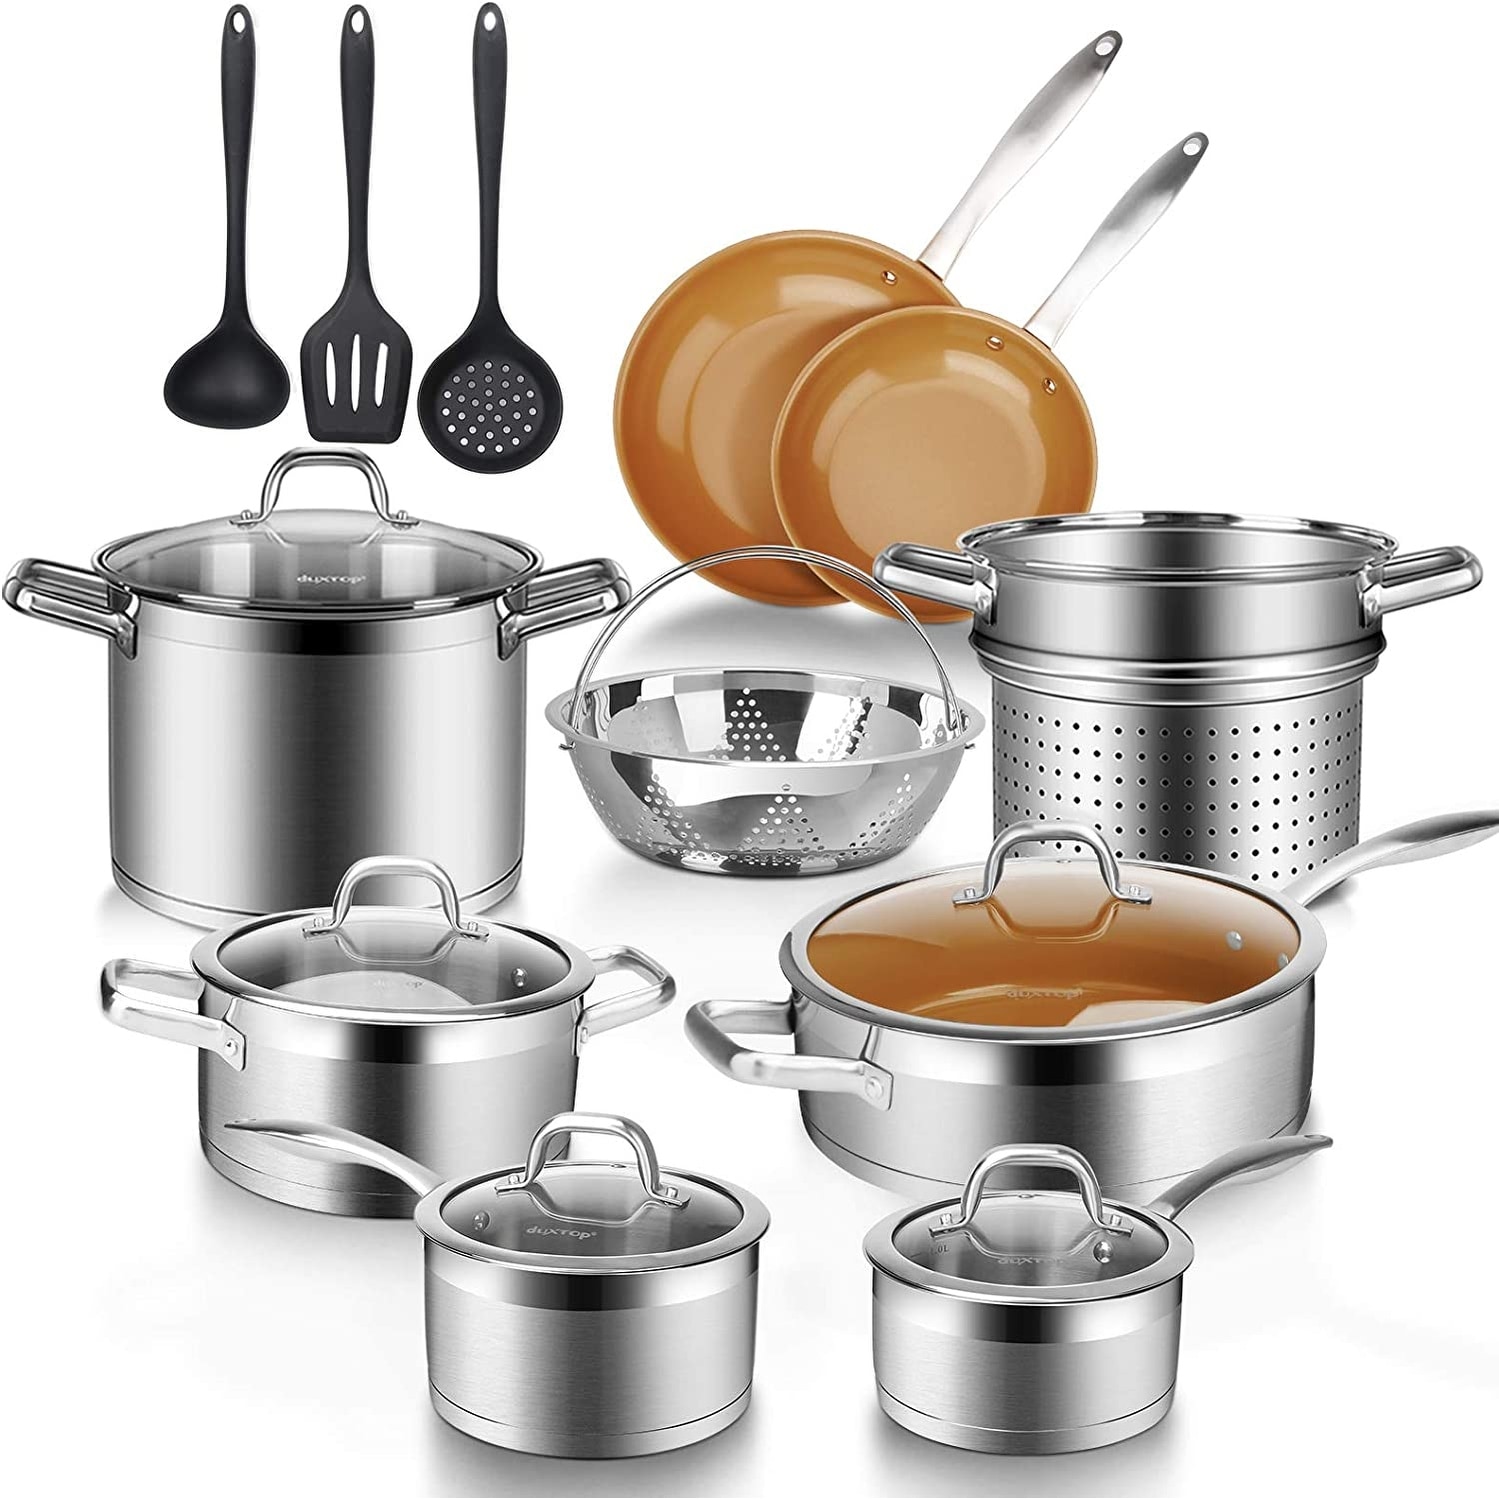 Duxtop Professional Stainless Steel 10PC Pots and Pans Set - Oven Safe,  Dishwasher Safe, Compatible with all Cooktops - Heavy Bottom with